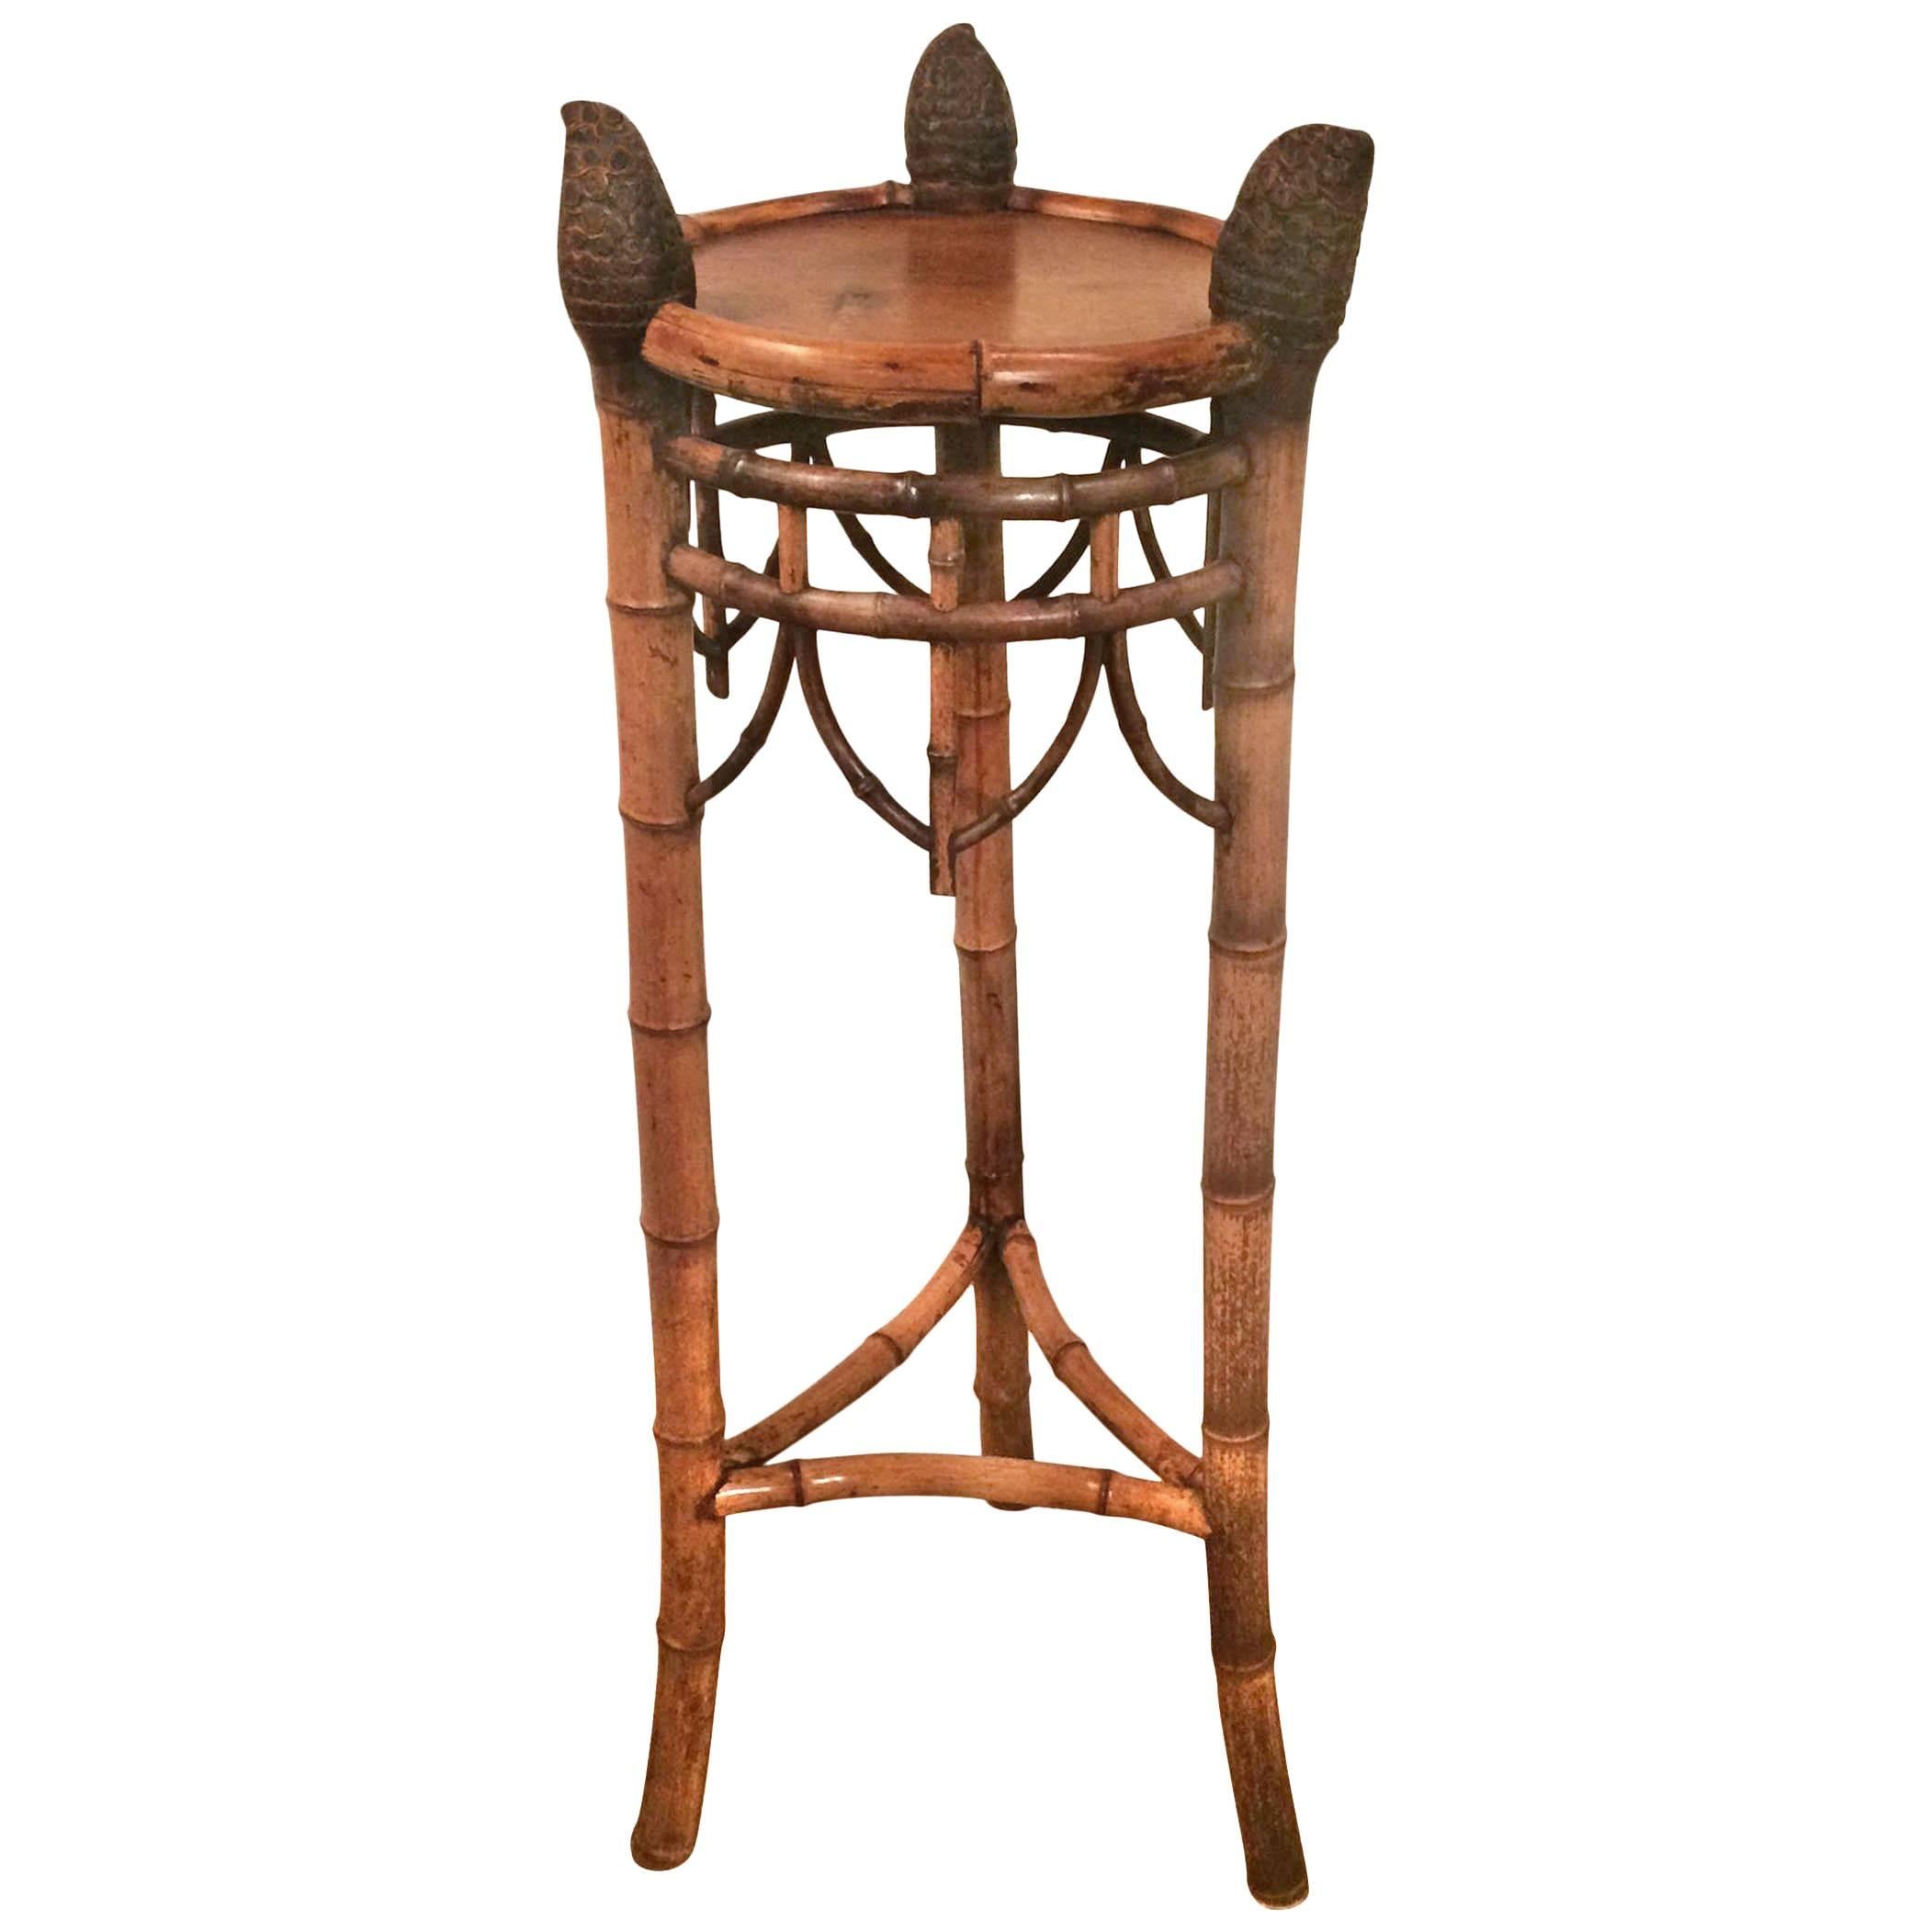 French bamboo plant stand; tripartite base leading up to natural textured finials; attributed to Perret et Vibert; circa 1860.